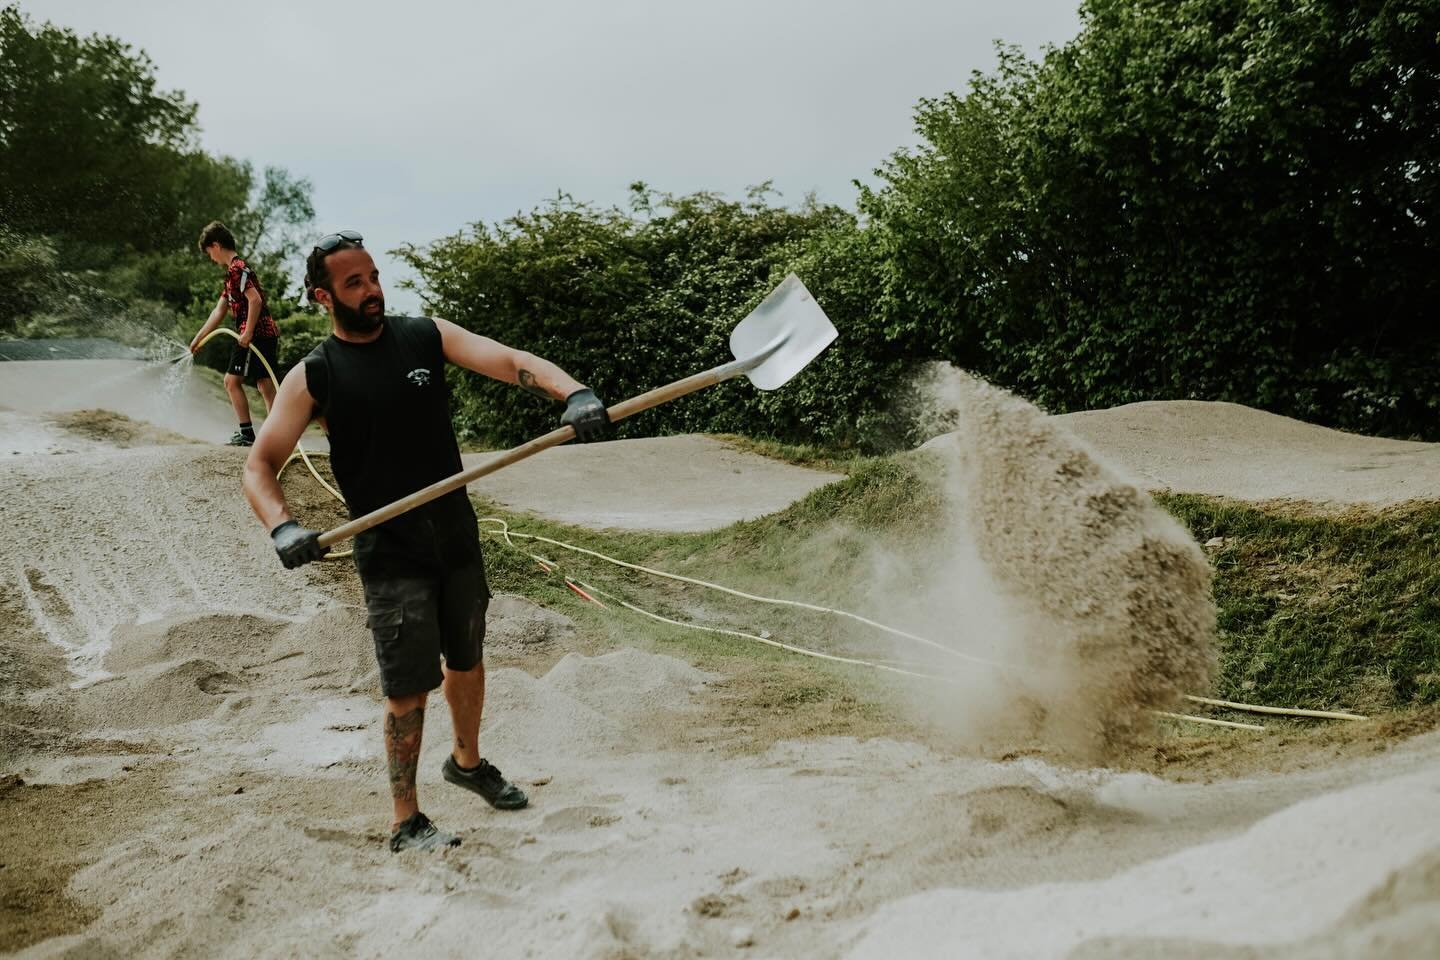 Massive community effort resurfacing the track over the weekend thanks to all involved will post more photos soon ❤️
&bull;
📸 @stateofloveandtrustalex
&bull;
#gy95 #gy95bmx #gypotrails #bmx #community